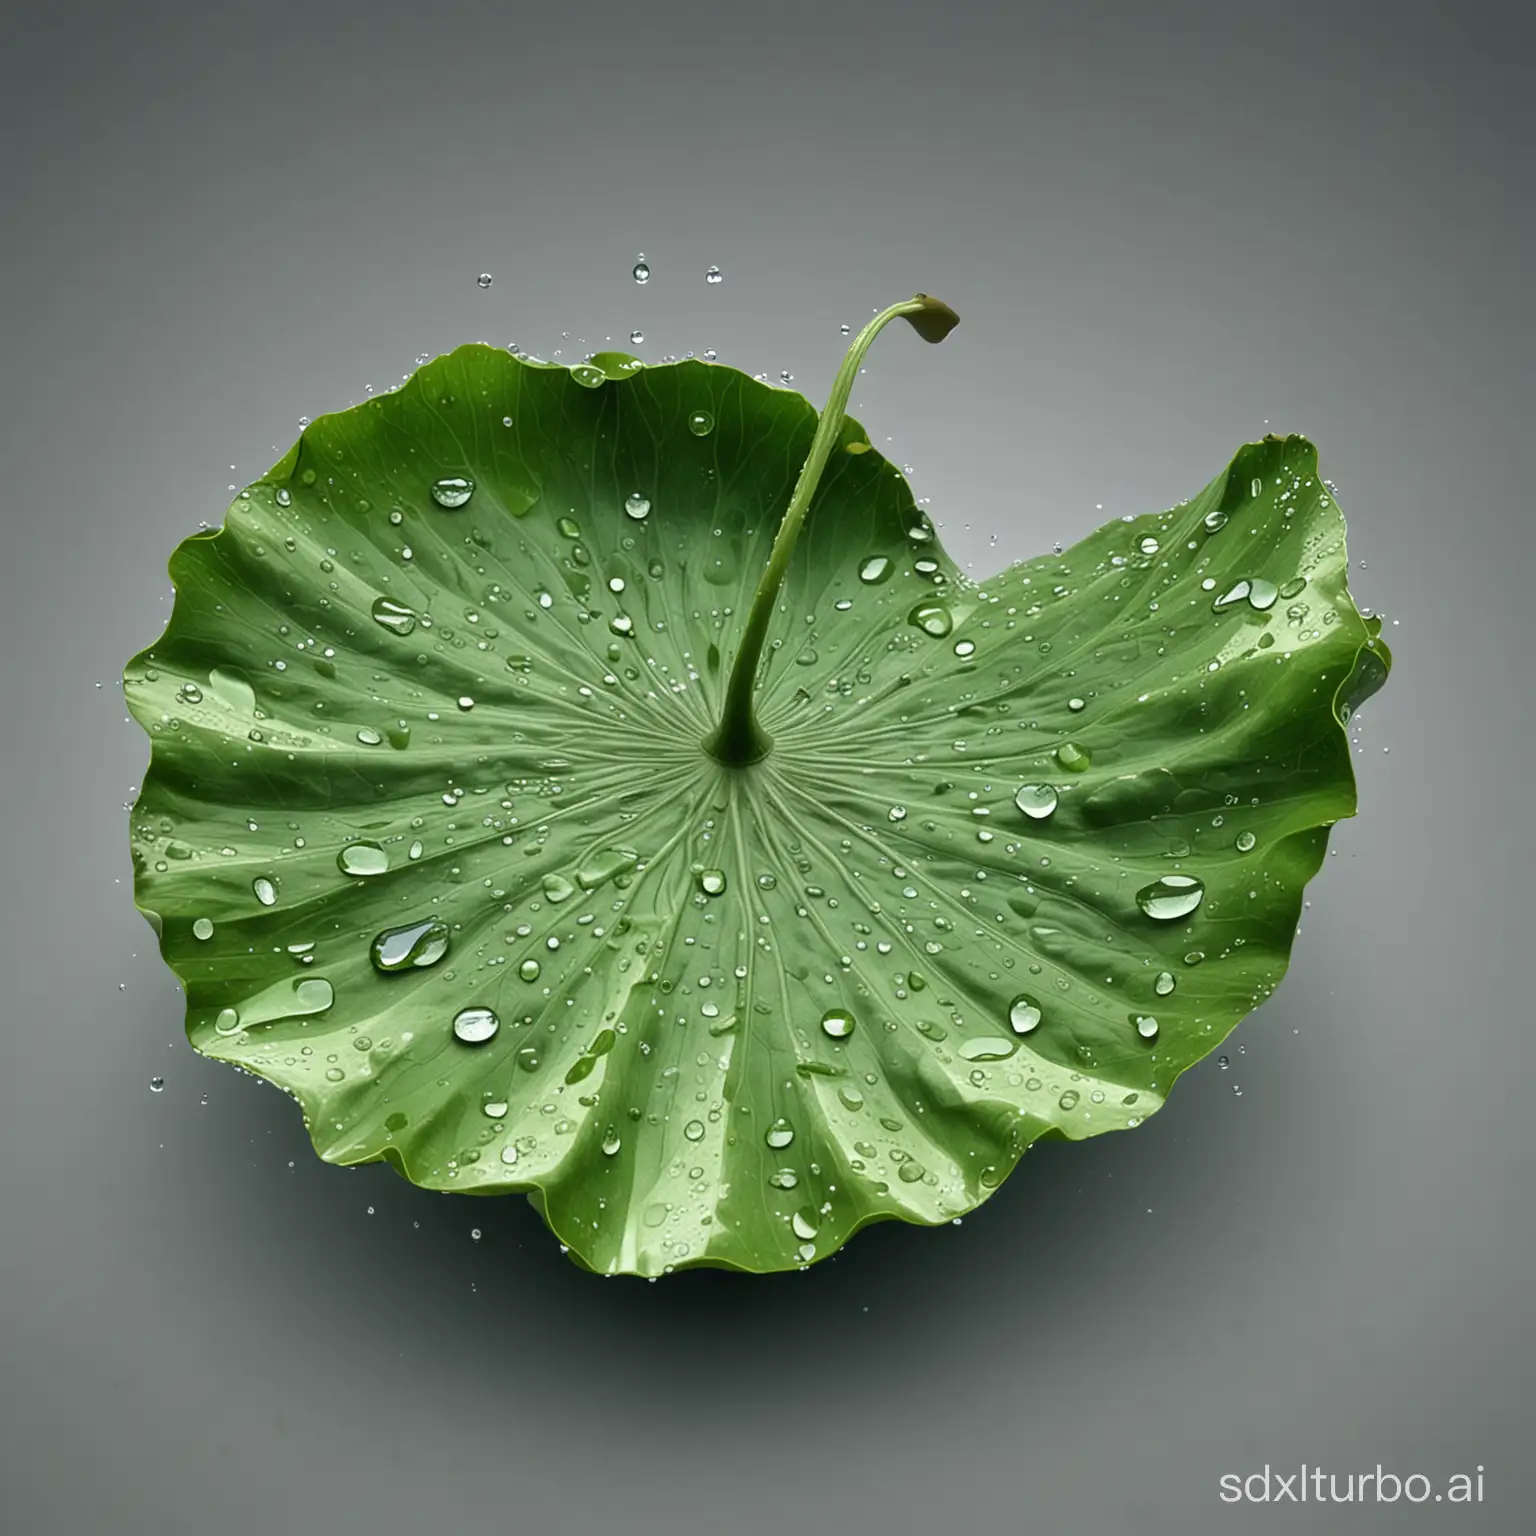 ThreeDimensional-Lotus-Leaf-with-Droplets-Natural-Beauty-Concept